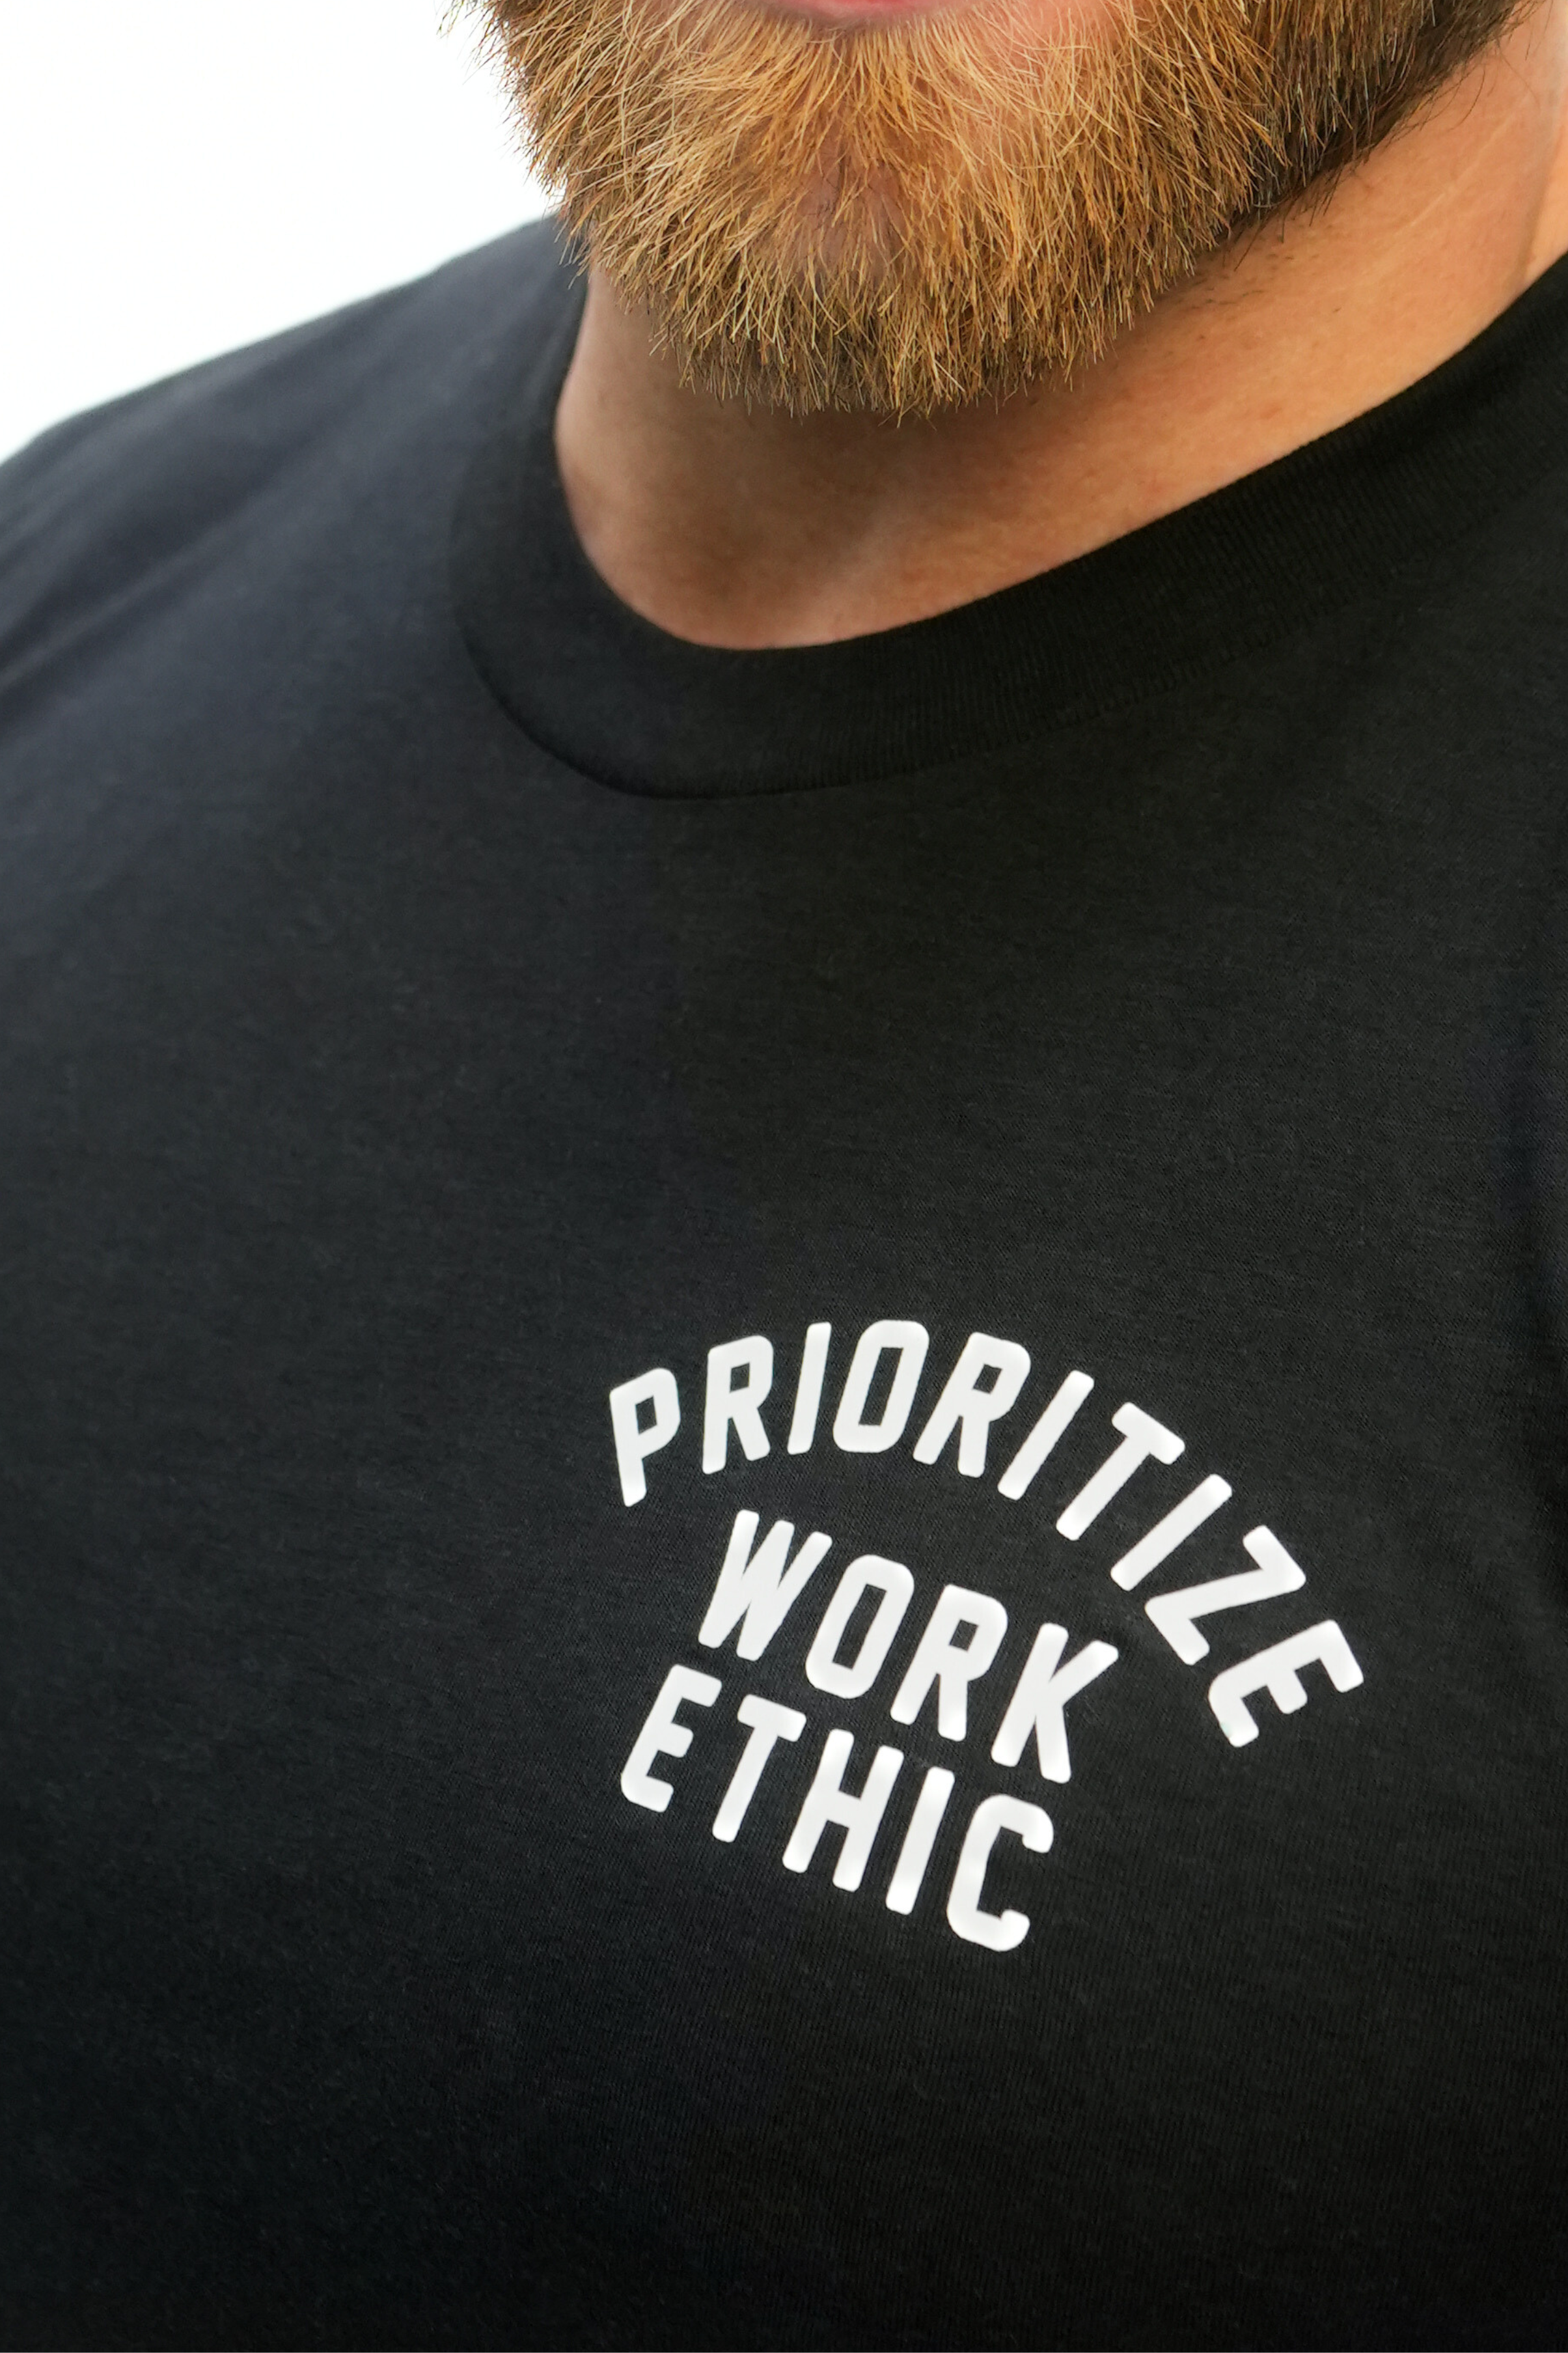 Prioritize Work Ethic T-Shirt